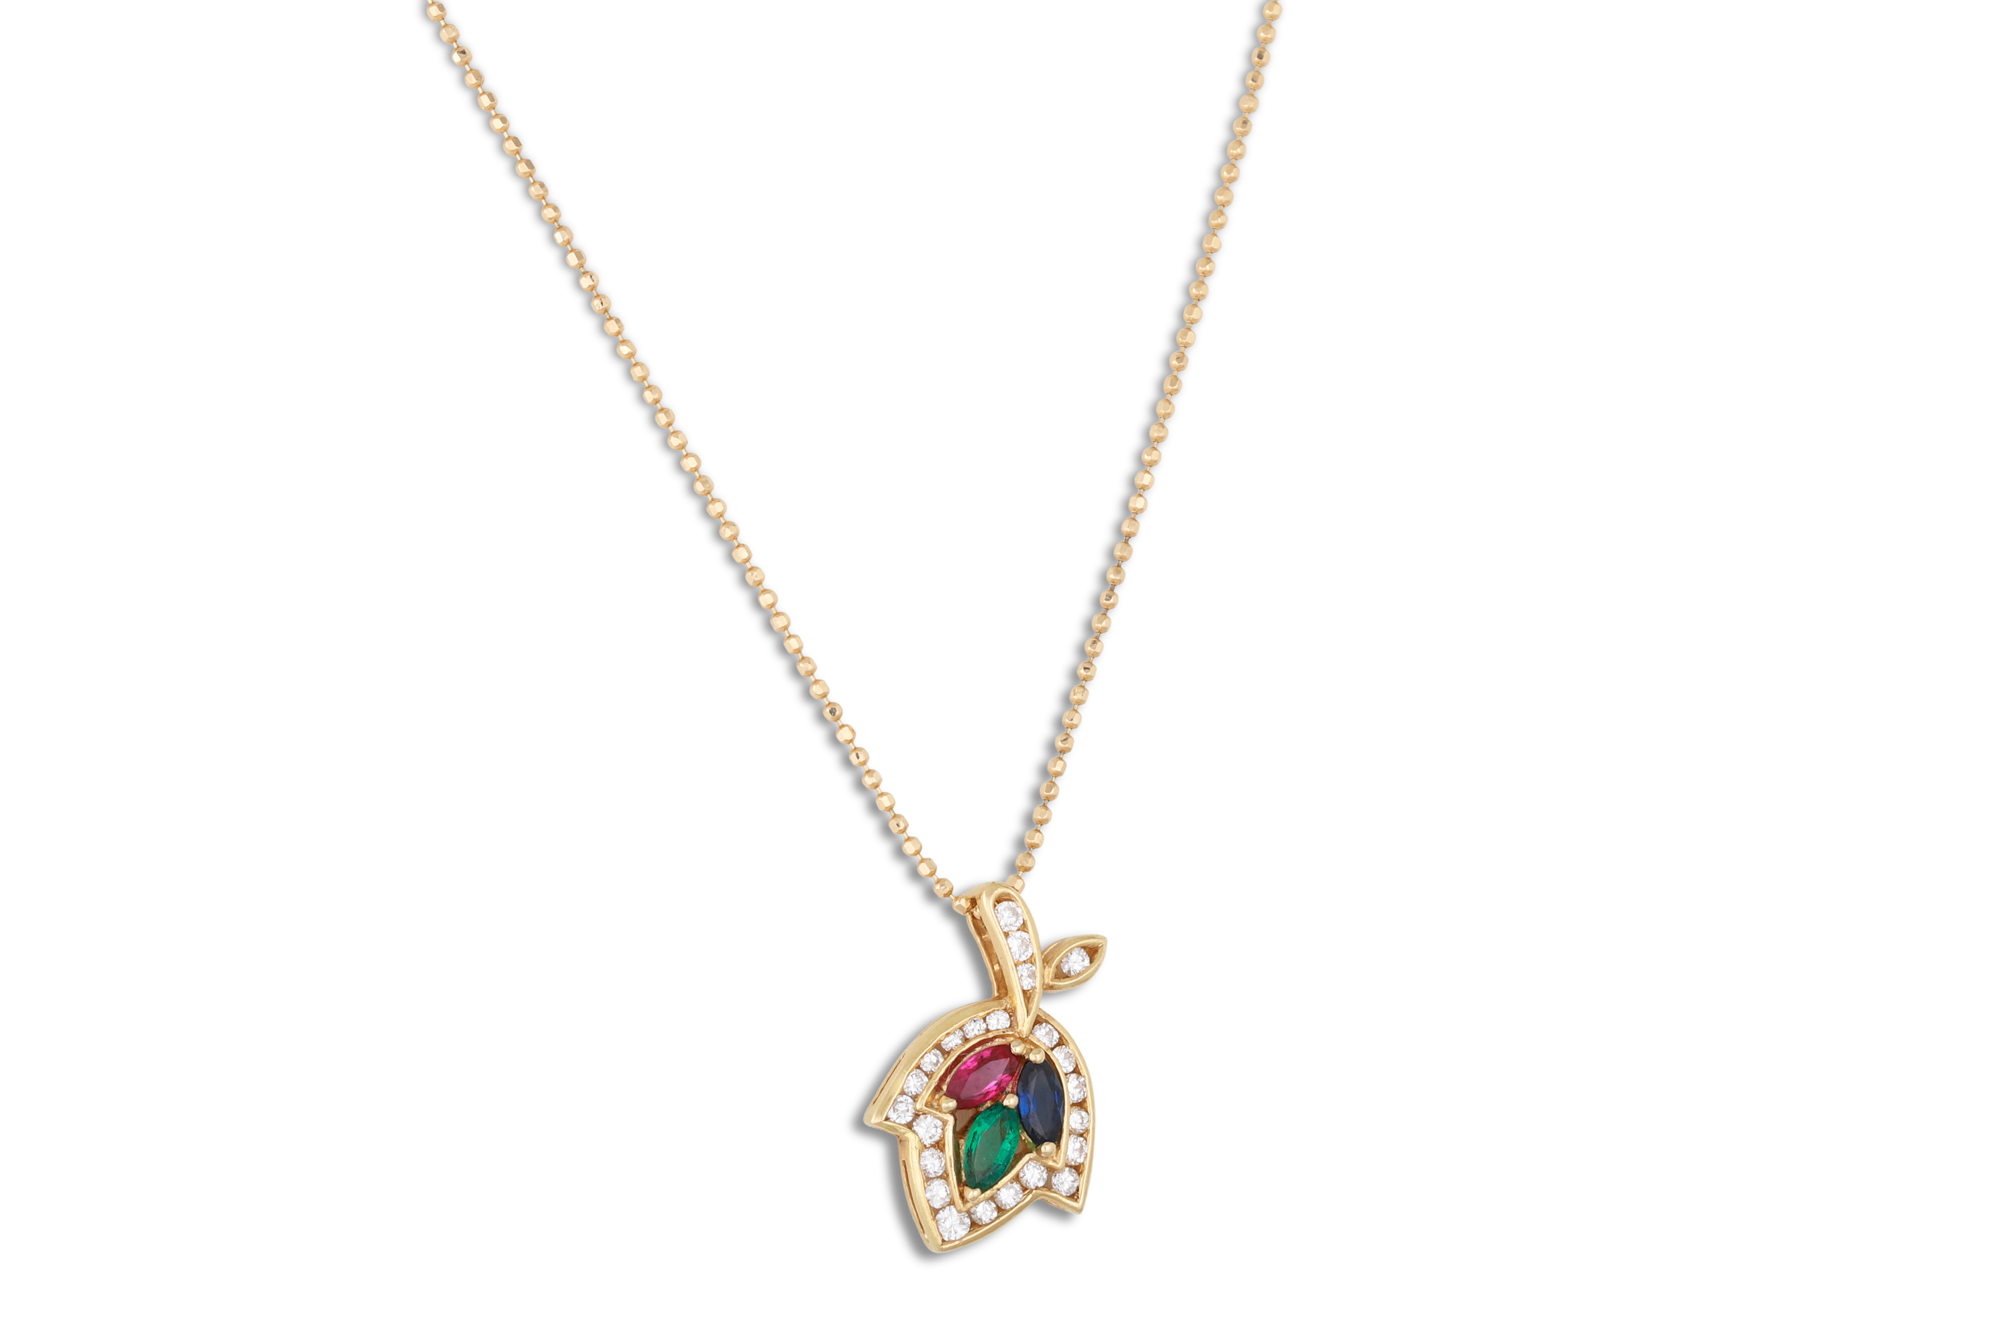 AN EMERALD, RUBY, SAPPHIRE AND DIAMOND PENDANT, mounted in 14ct yellow gold, on a chain.